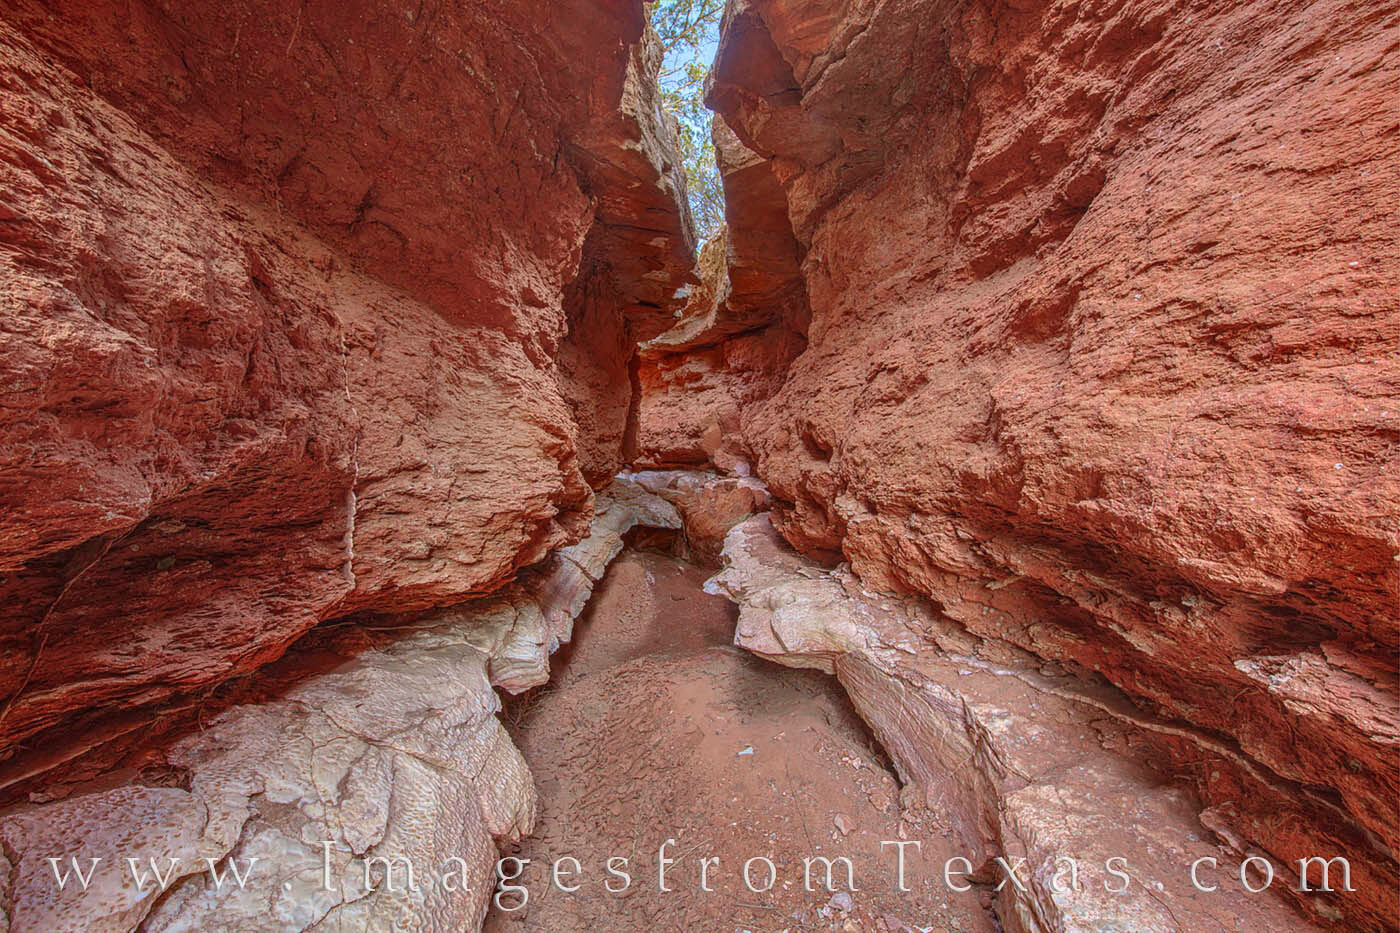 Tunnel Slot Canyon is a two-toned hidden canyon made of gypsum (bottom layer) and quartermaster sandstone (upper layer).